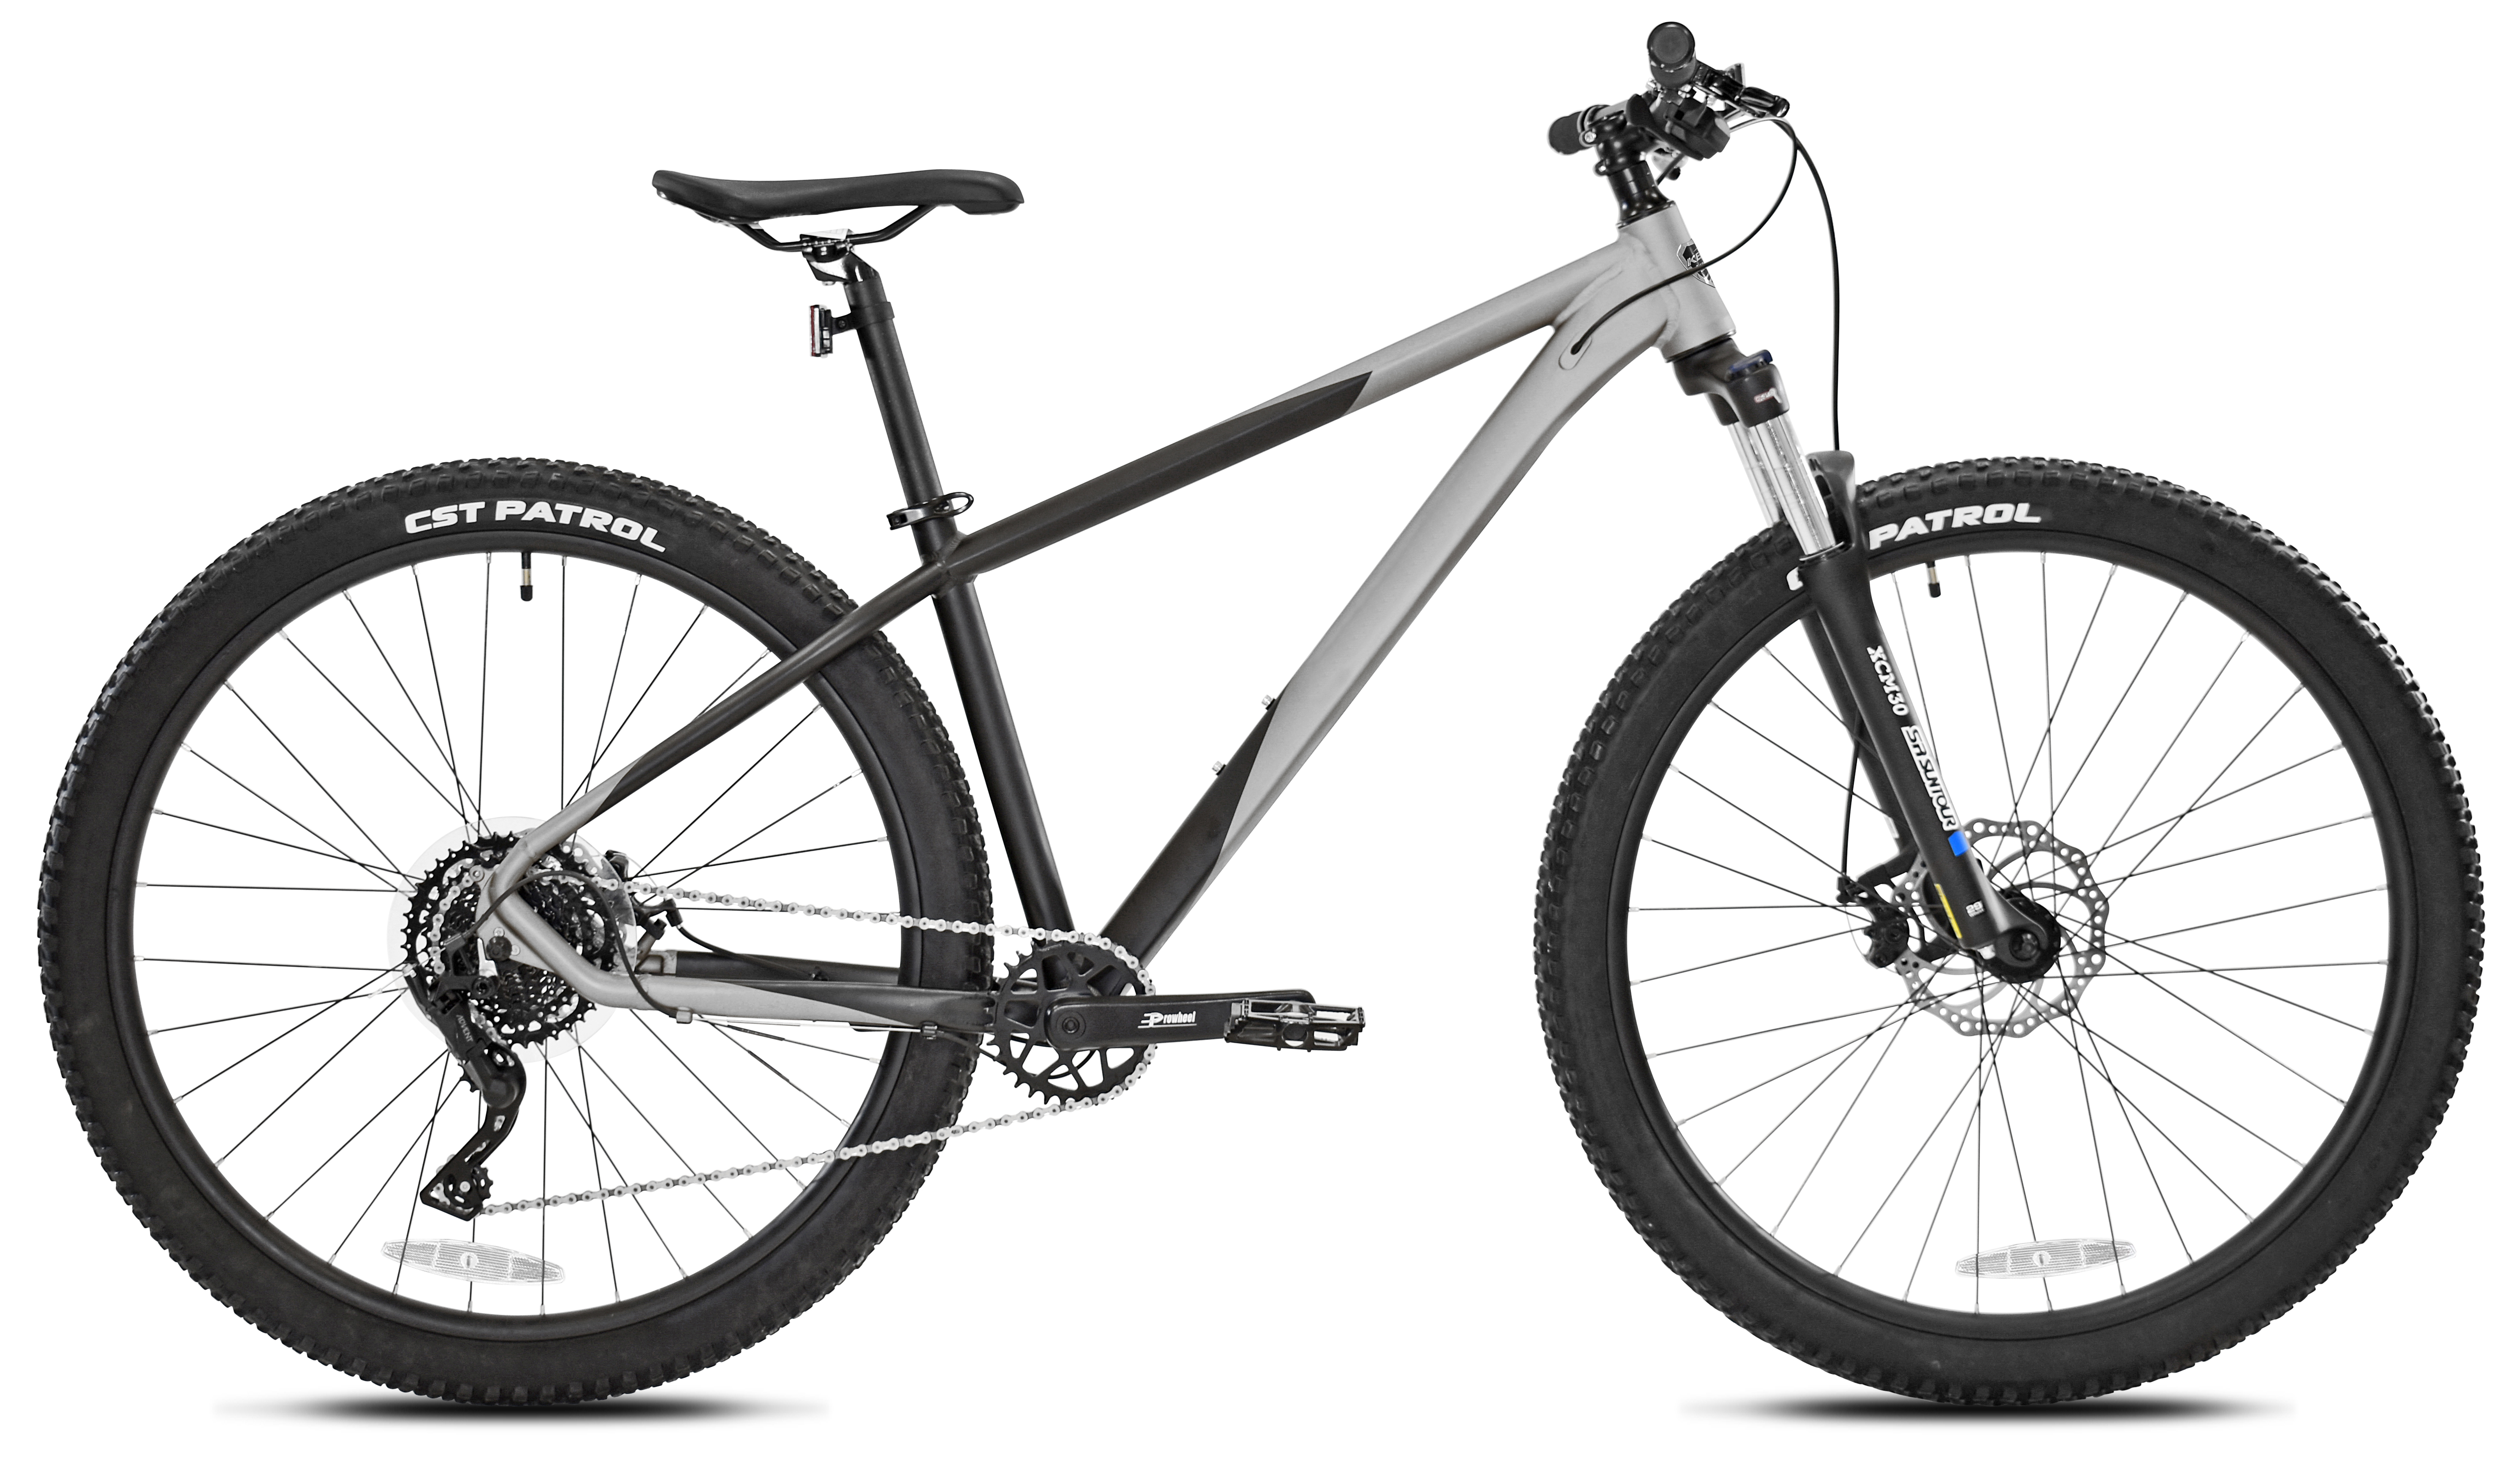 Kent Bicycles 29" Men's Trouvaille Mountain Bike Medium, Black and Taupe - image 1 of 11